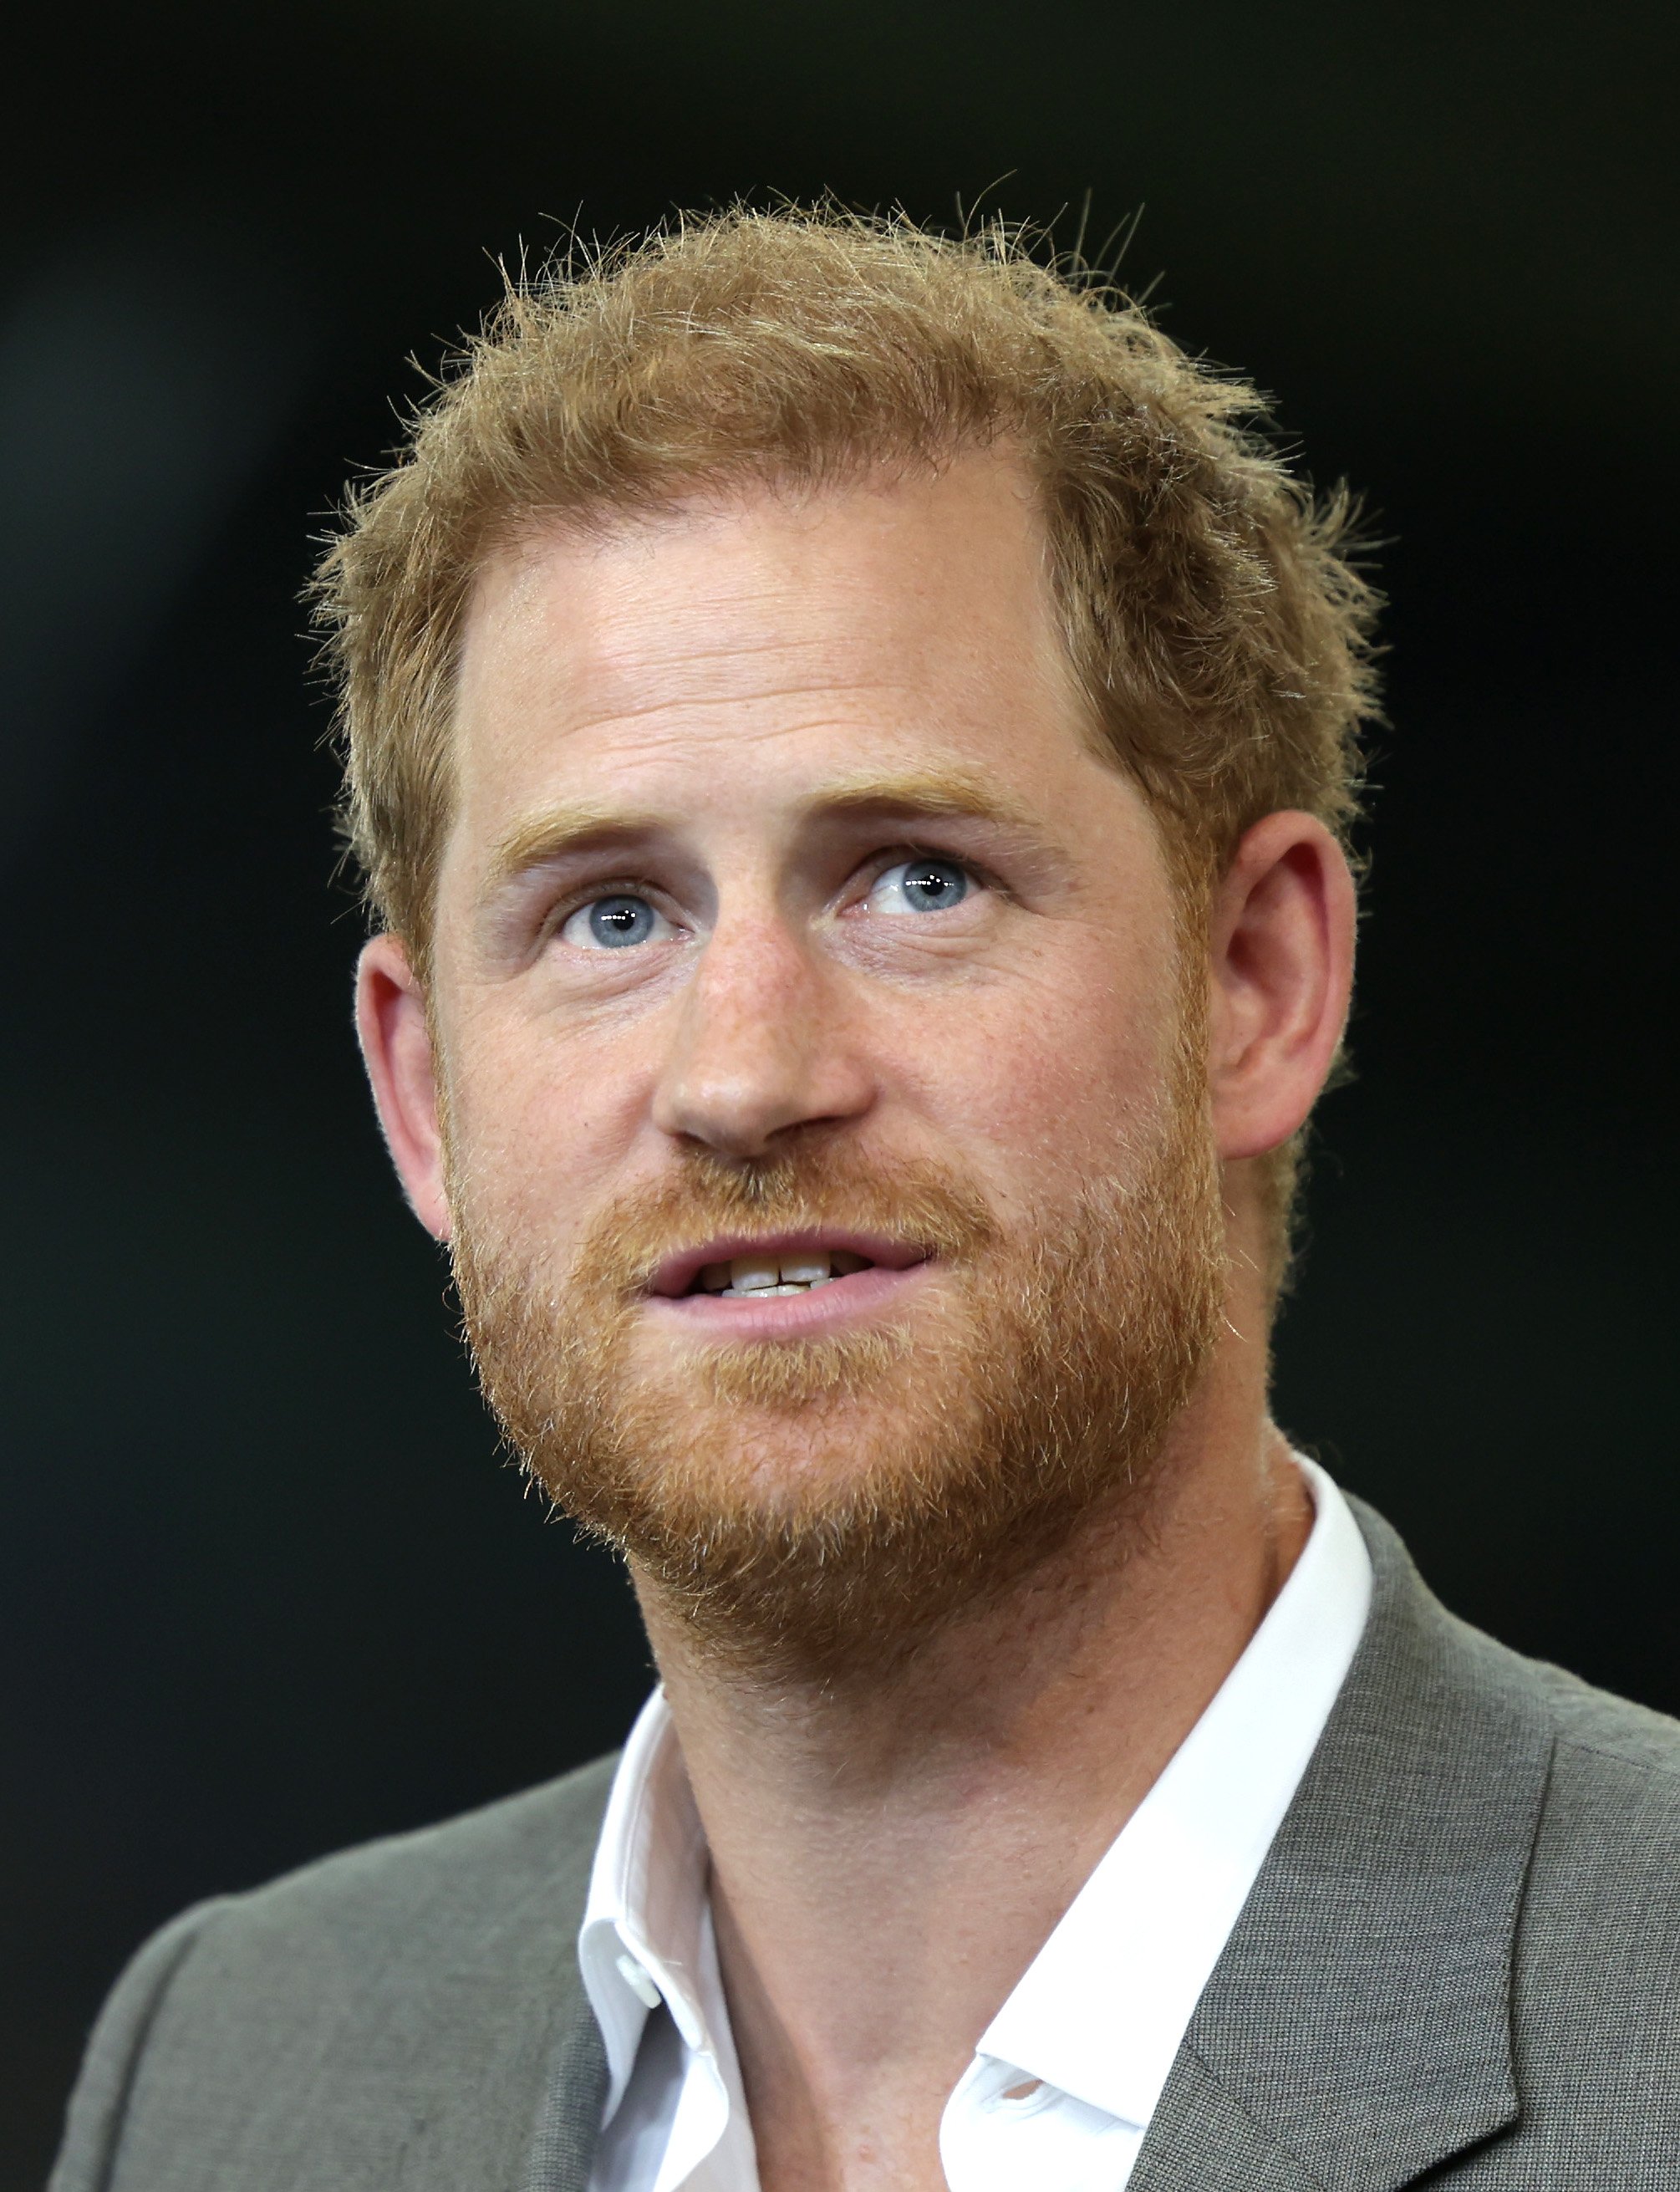 Prince Harry, Duke of Sussex speak, during the Invictus Games Dusseldorf 2023 - One Year To Go events on September 06, 2022, in Dusseldorf, Germany. | Source: Getty Images